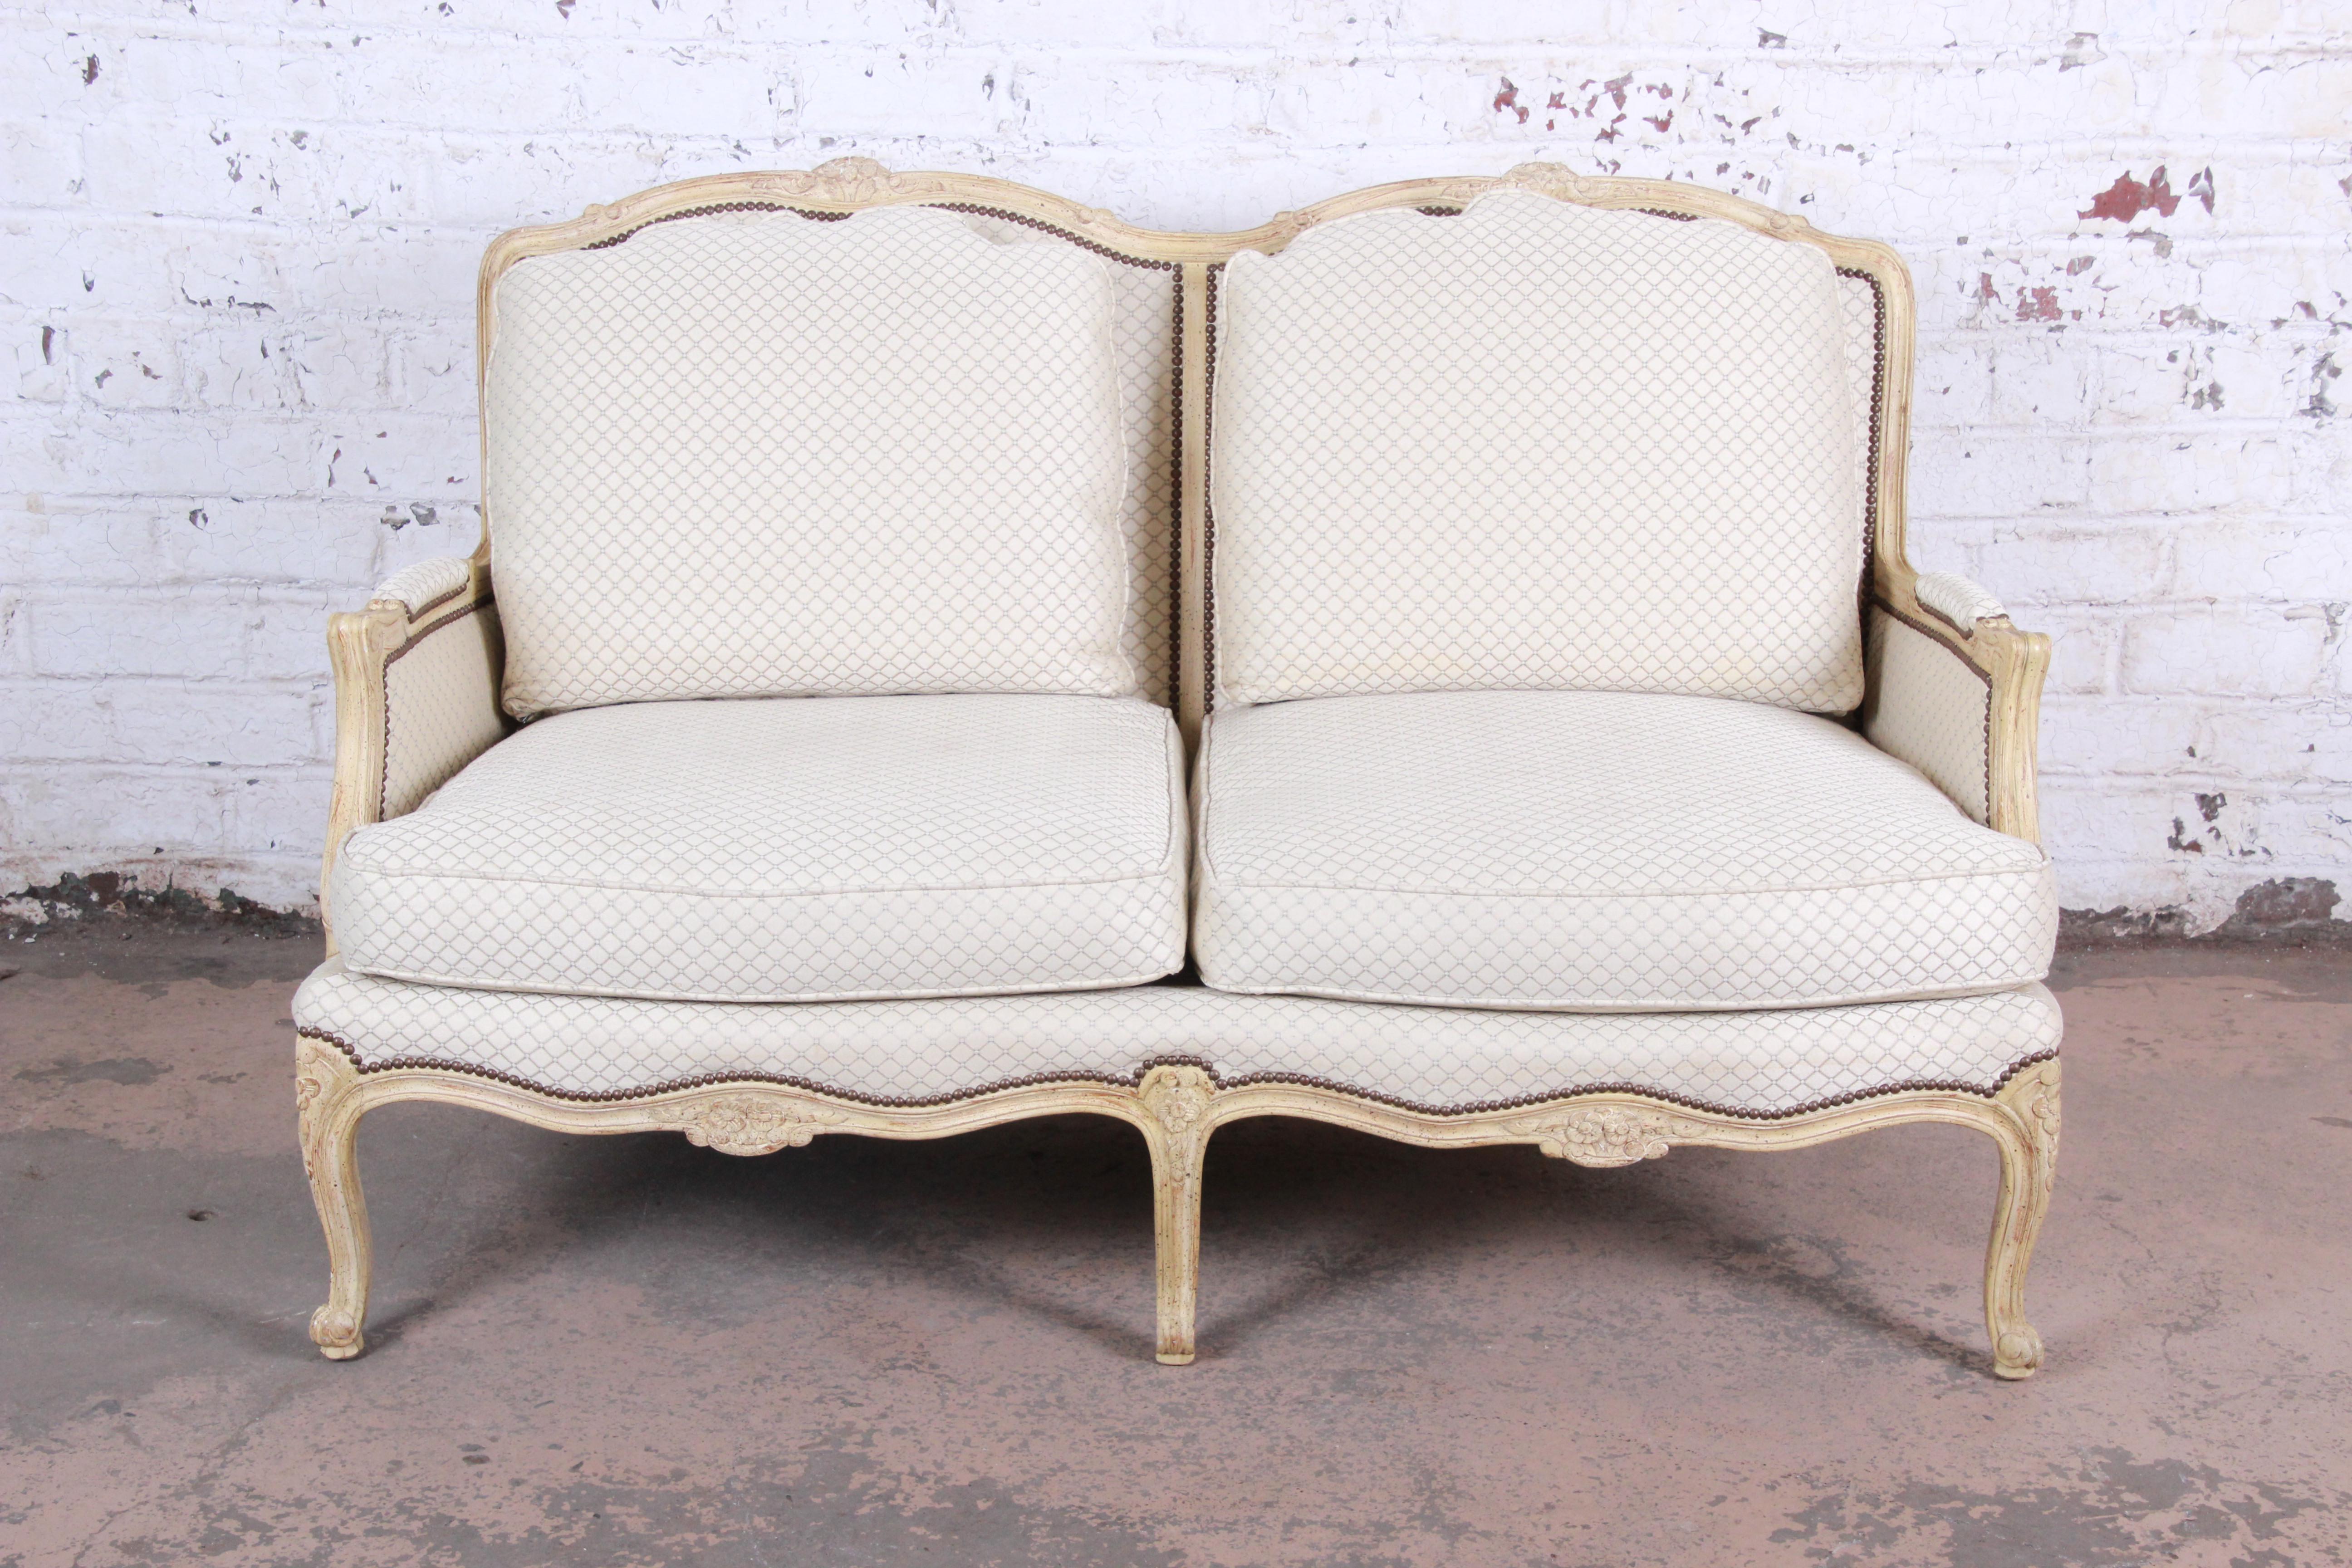 A gorgeous French Provincial Louis XV style loveseat or settee by Baker Furniture. The loveseat features stunning carved wood details with cabriole legs and studded ivory upholstery. The upholstery has been professionally cleaned. The original Baker